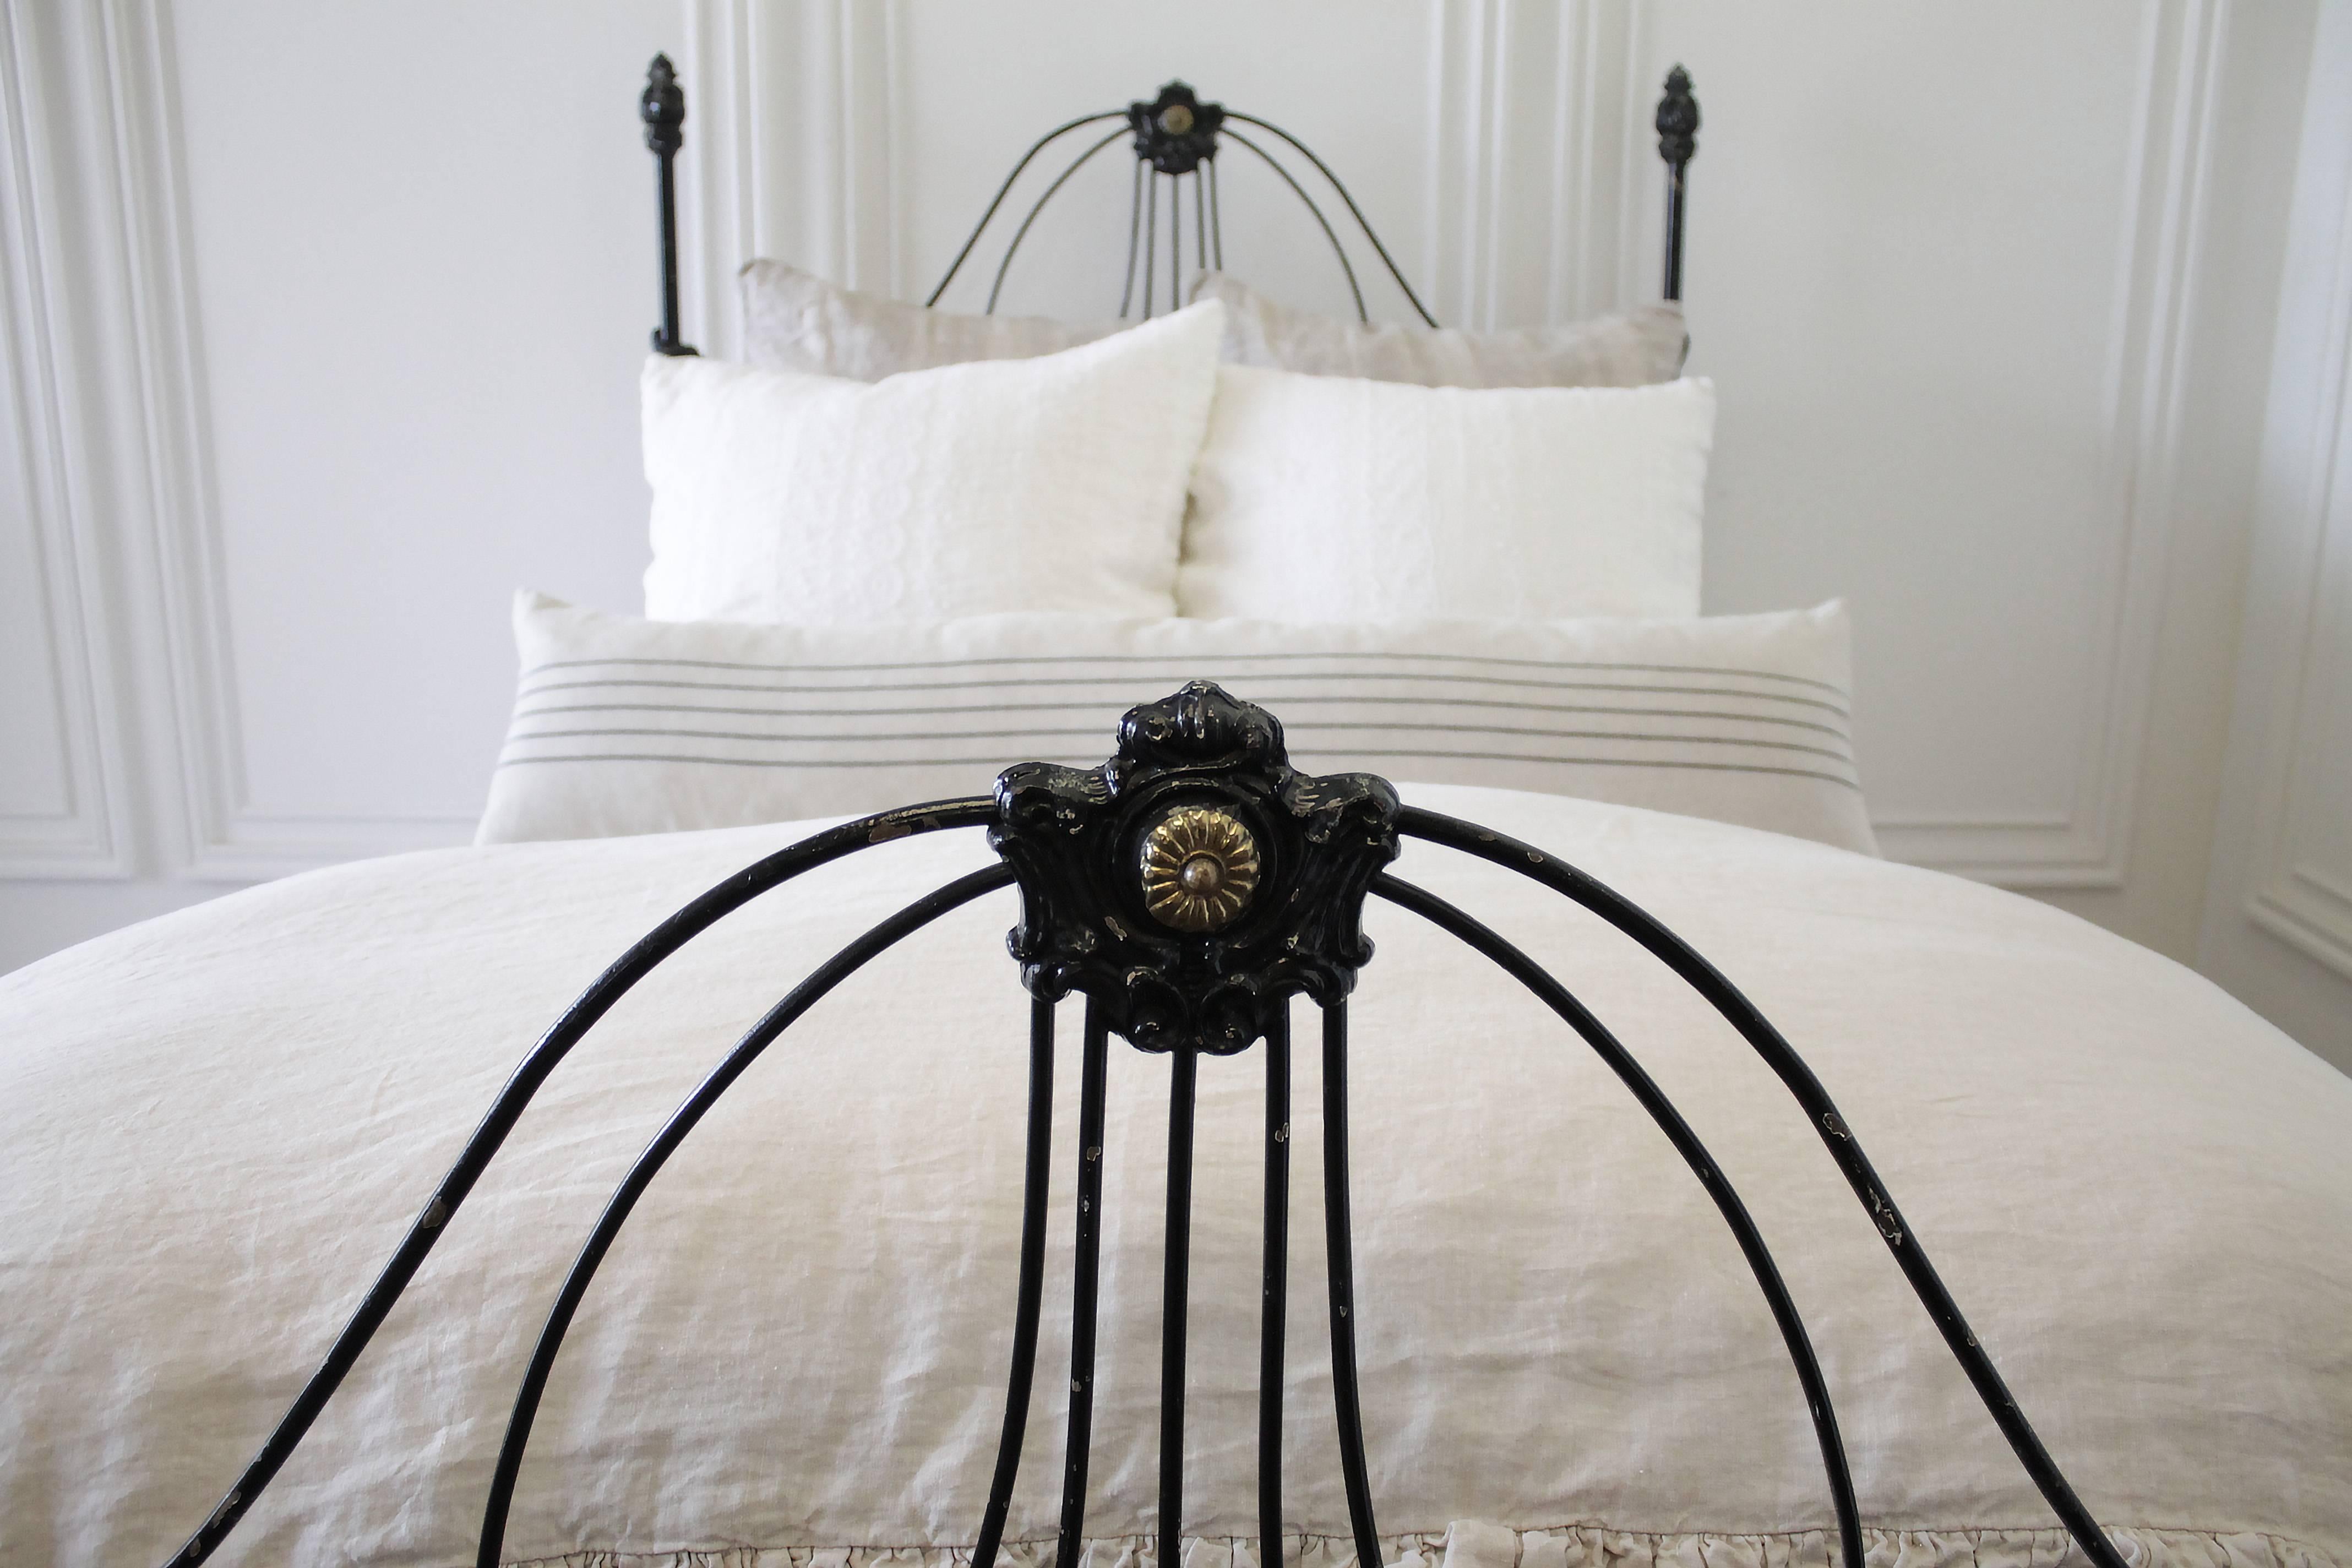 Beautiful antique iron bed from the mid-1800s in a distressed black painted finish. The paint is not the original, and looks to have been repainted over the years. A beautiful time worn patina. The center headboard and footboard medallions have a